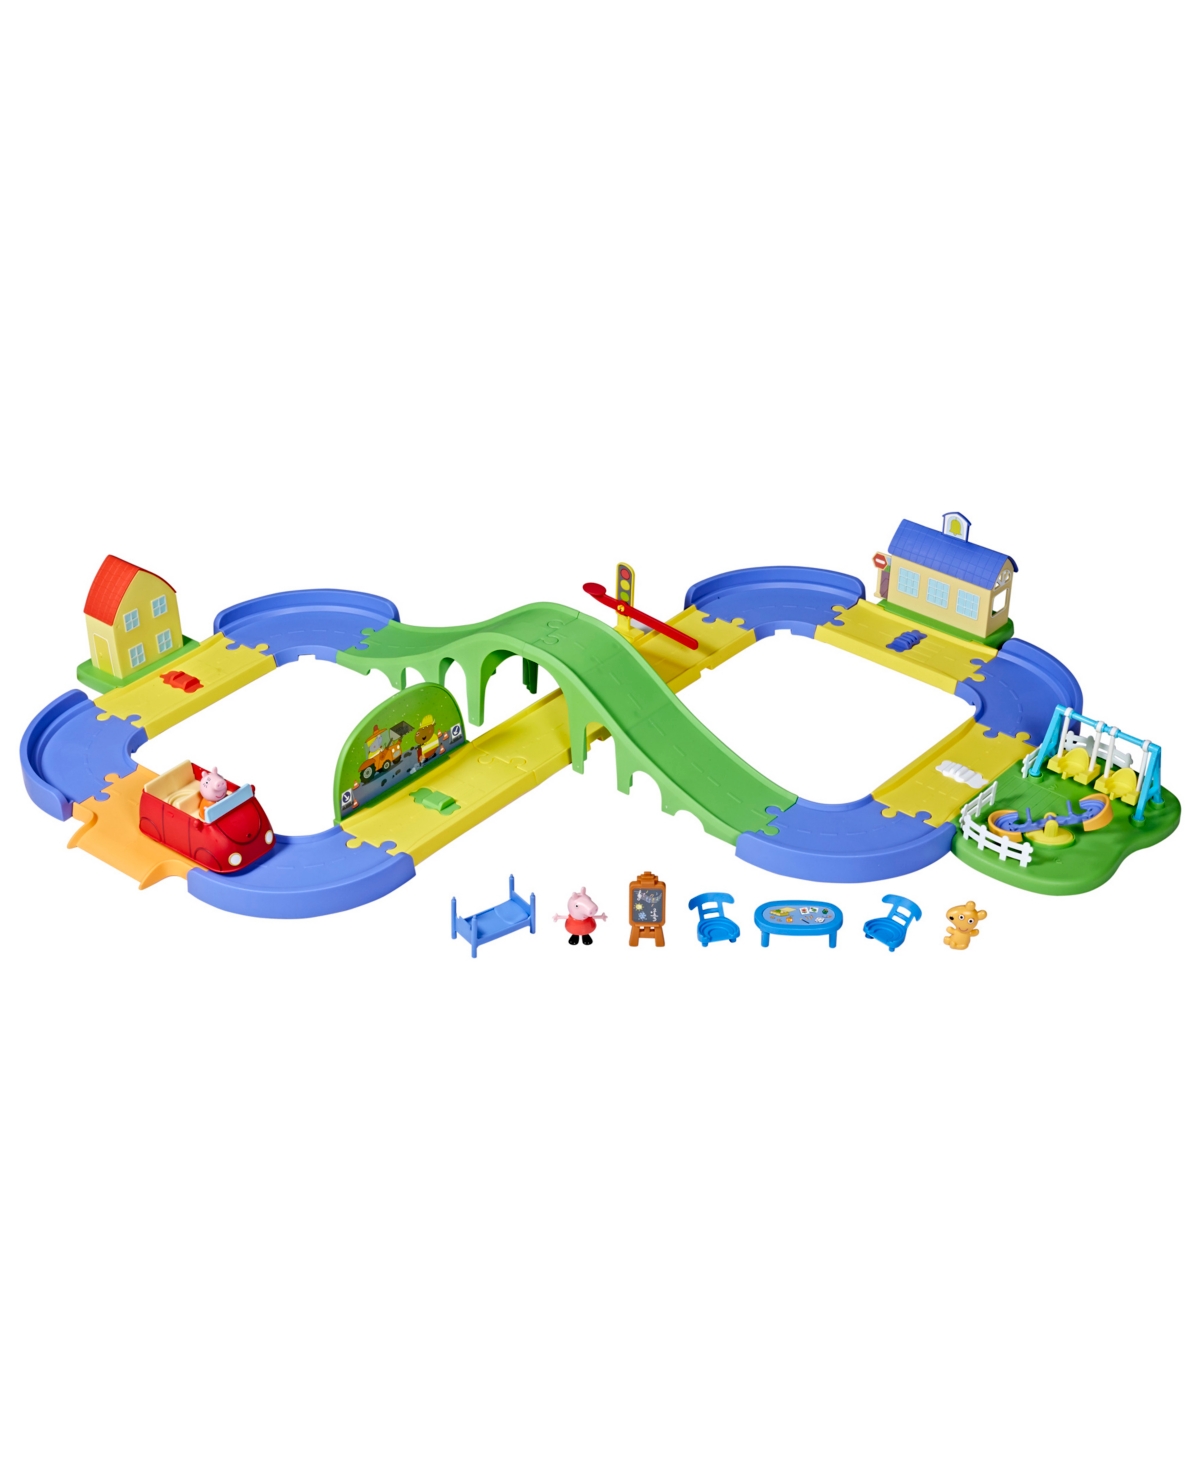 Peppa Pig Kids' All Around Peppa's Town Set With Adjustable Track, Car In No Color